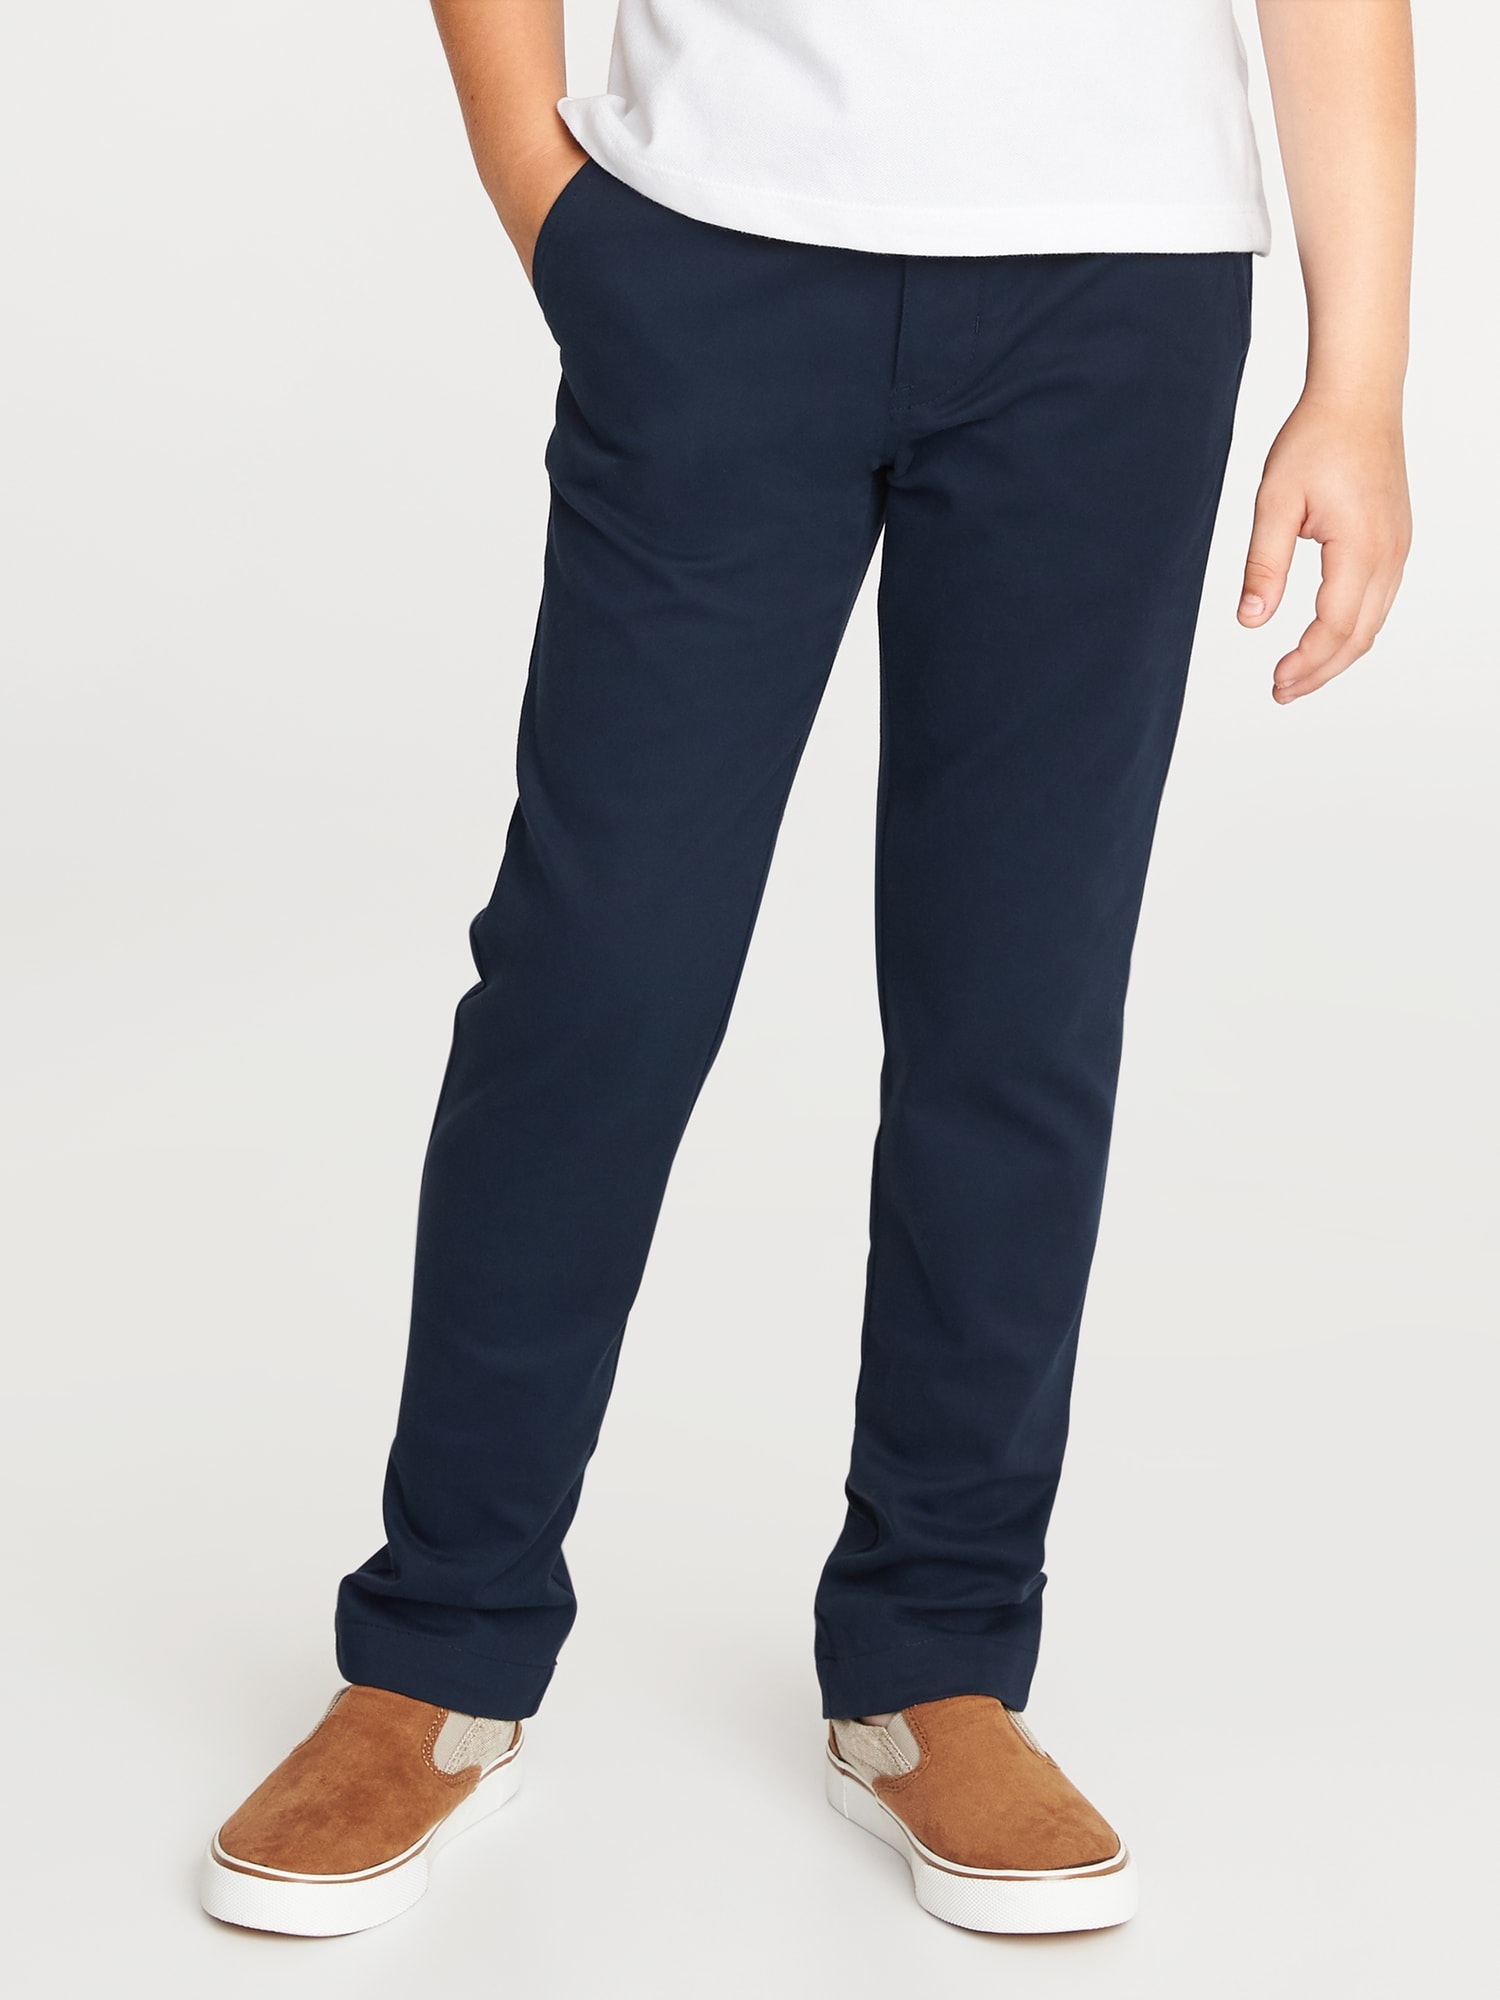 *Today Only Deal* Skinny Built-In Flex Uniform Pants for Boys